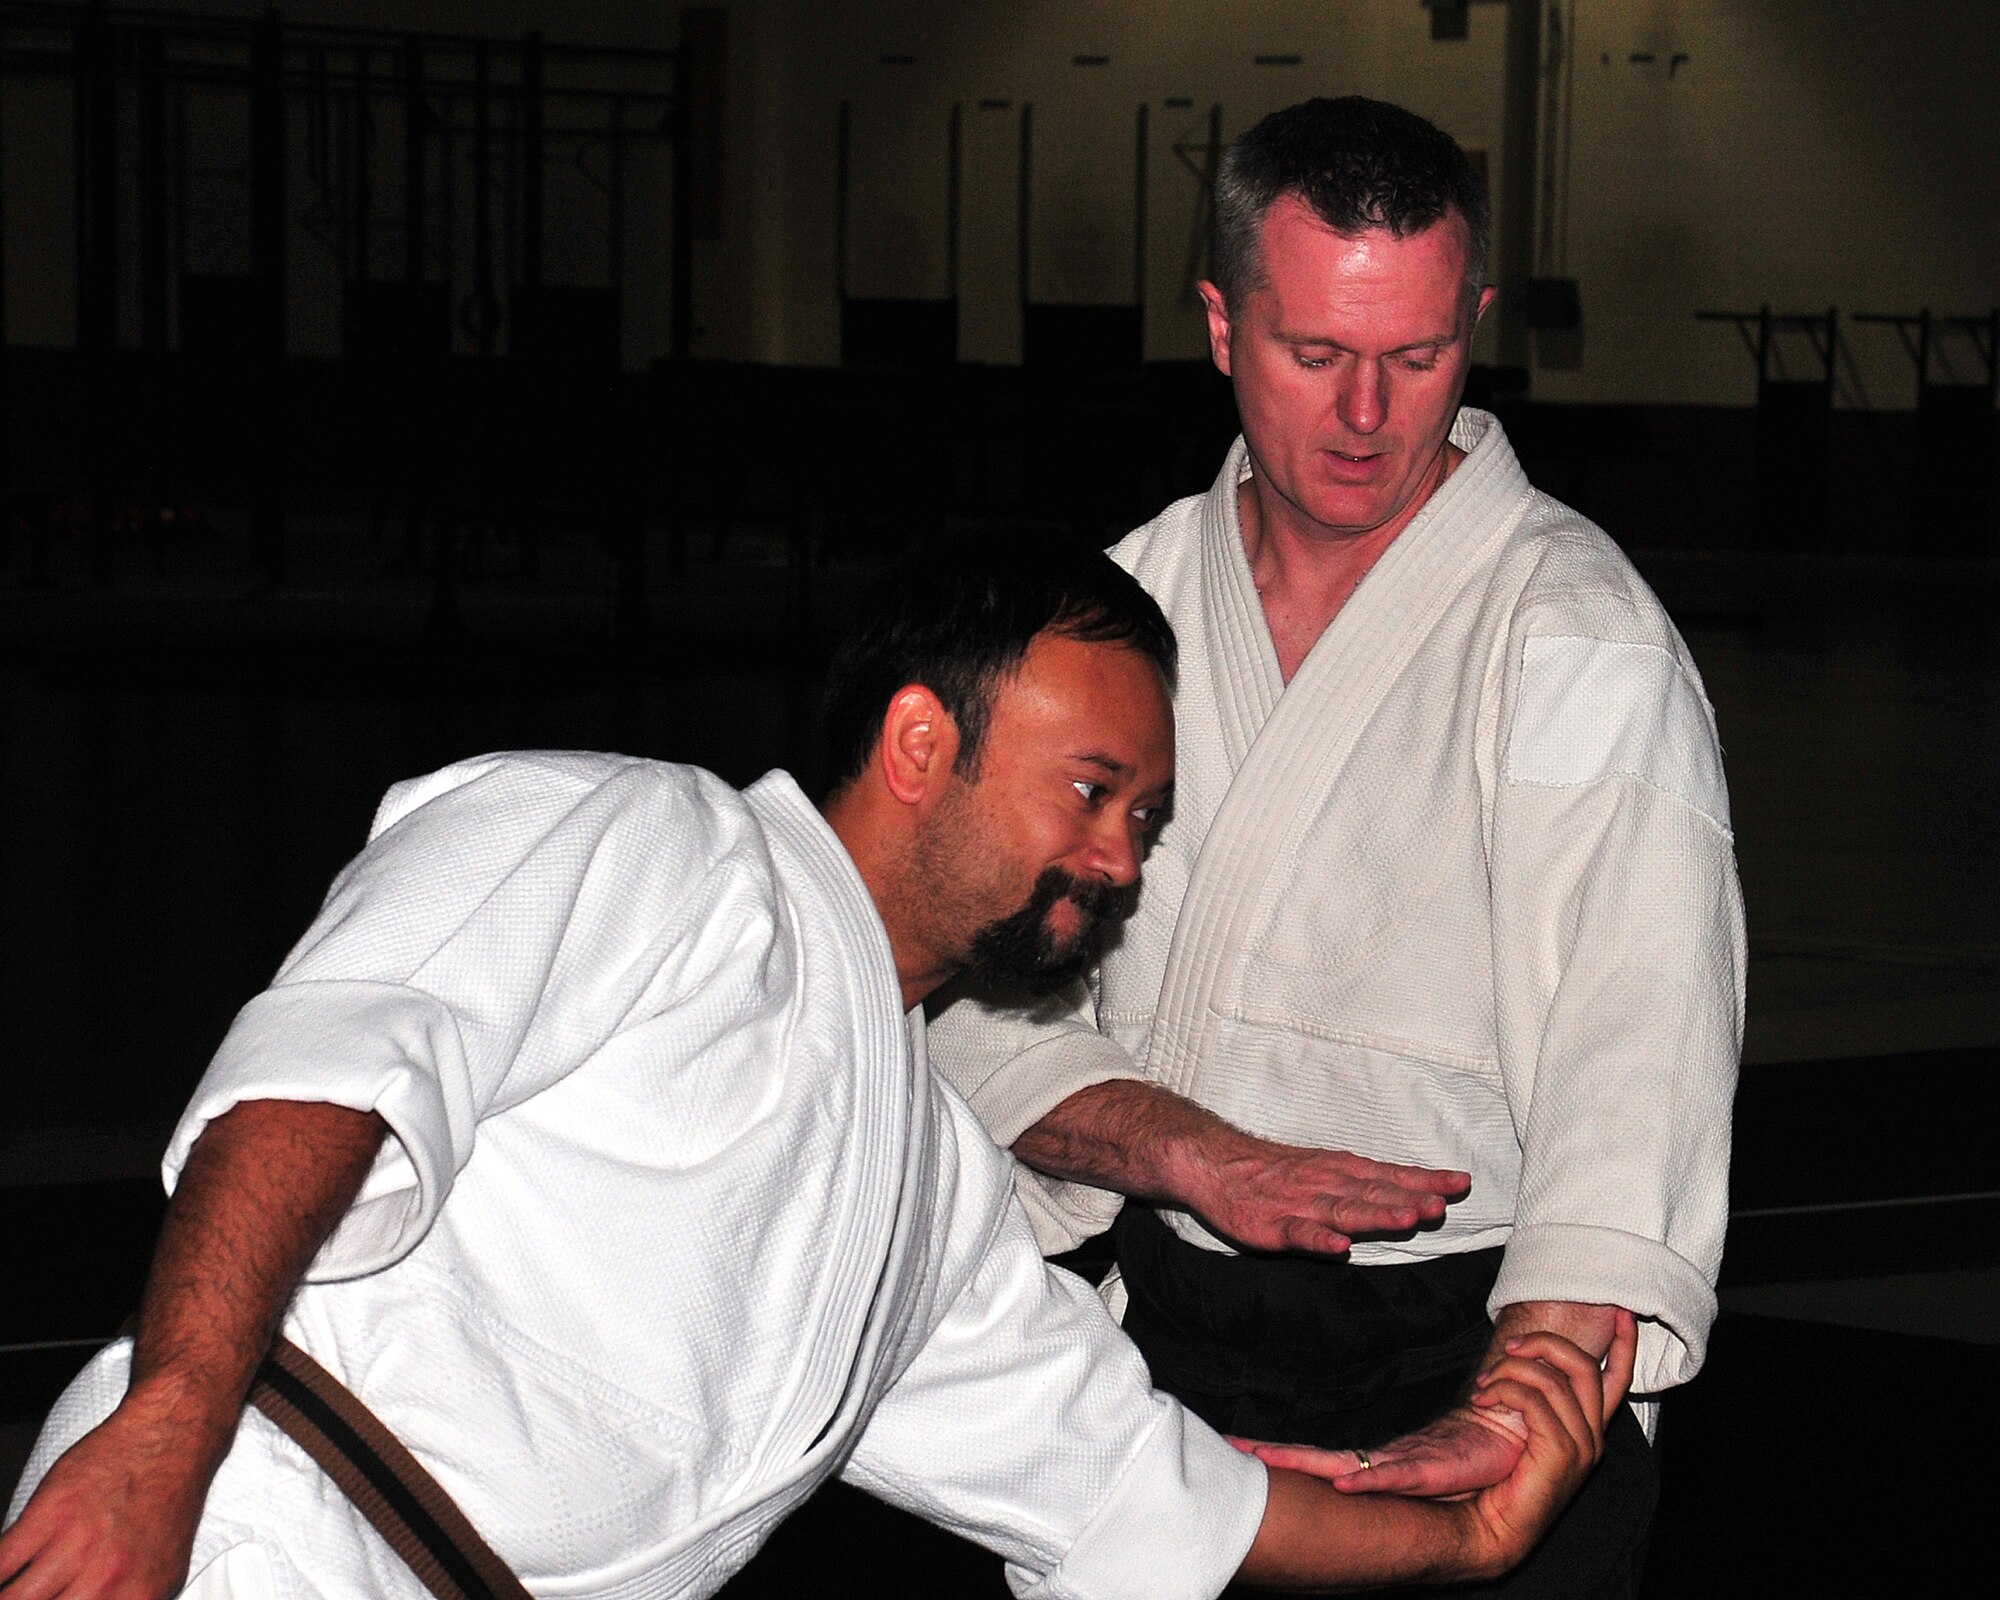 U.S. Navy Reserve Lt. Cmdr. Lloyd McWhirt demonstrates an Aikido joint-locking technique on his assistant, Brad Clear, May 22 at the field house on Offutt Air Force Base, Nebraska. McWhirt runs his own Dojo in downtown Omaha and gives free Aikido lessons to the Offutt community at the Offutt Field House. (U.S. Air Force photo by D.P. Heard/Released)